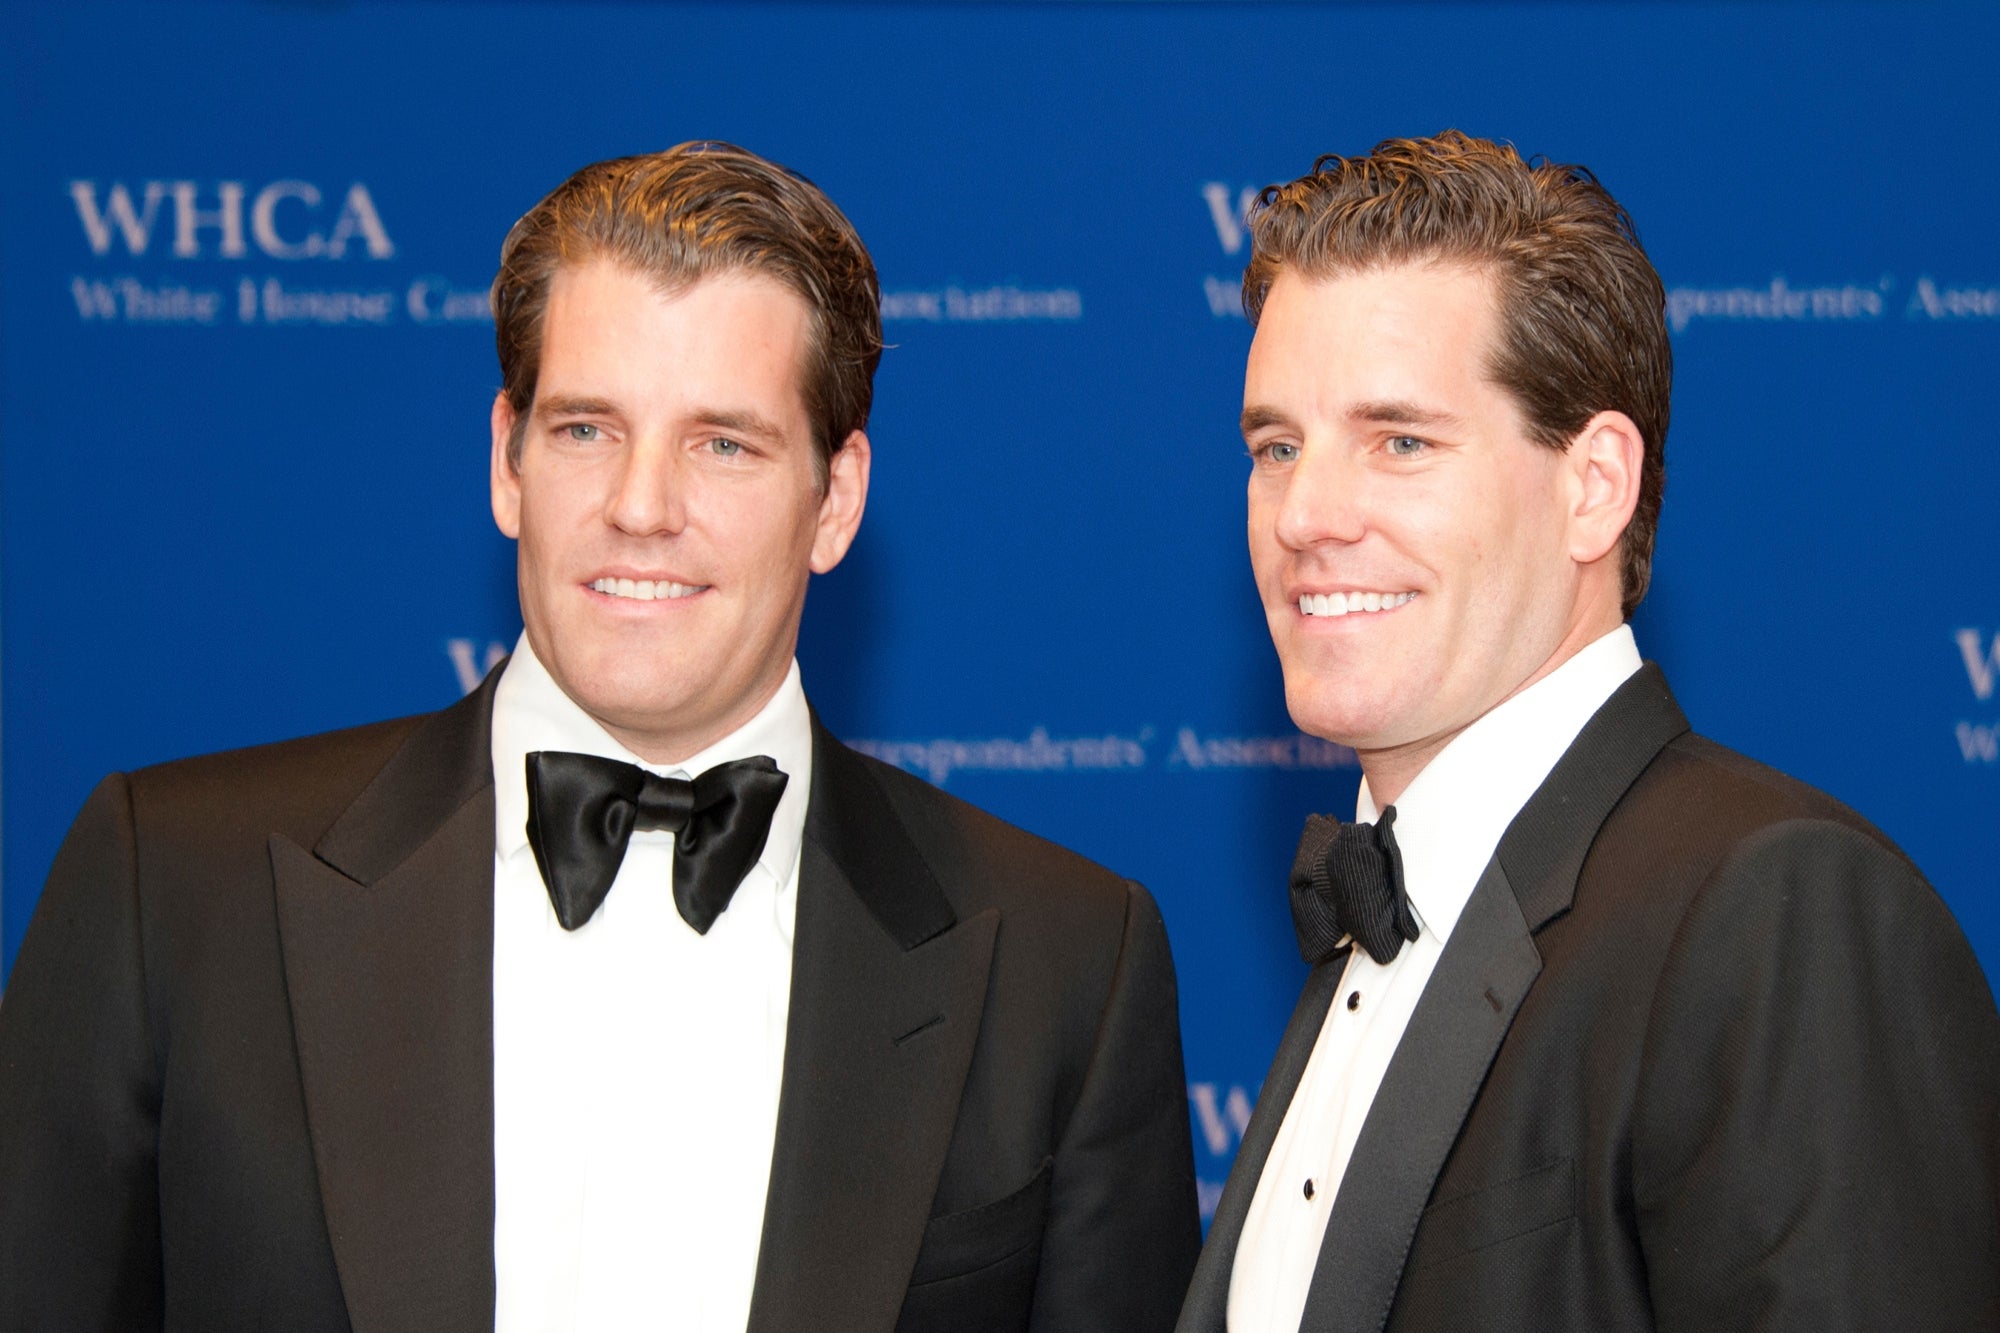 NFT Collection dubbed as 'Crypto Legends' celebrates real life crypto legends - The Winklevoss Twins